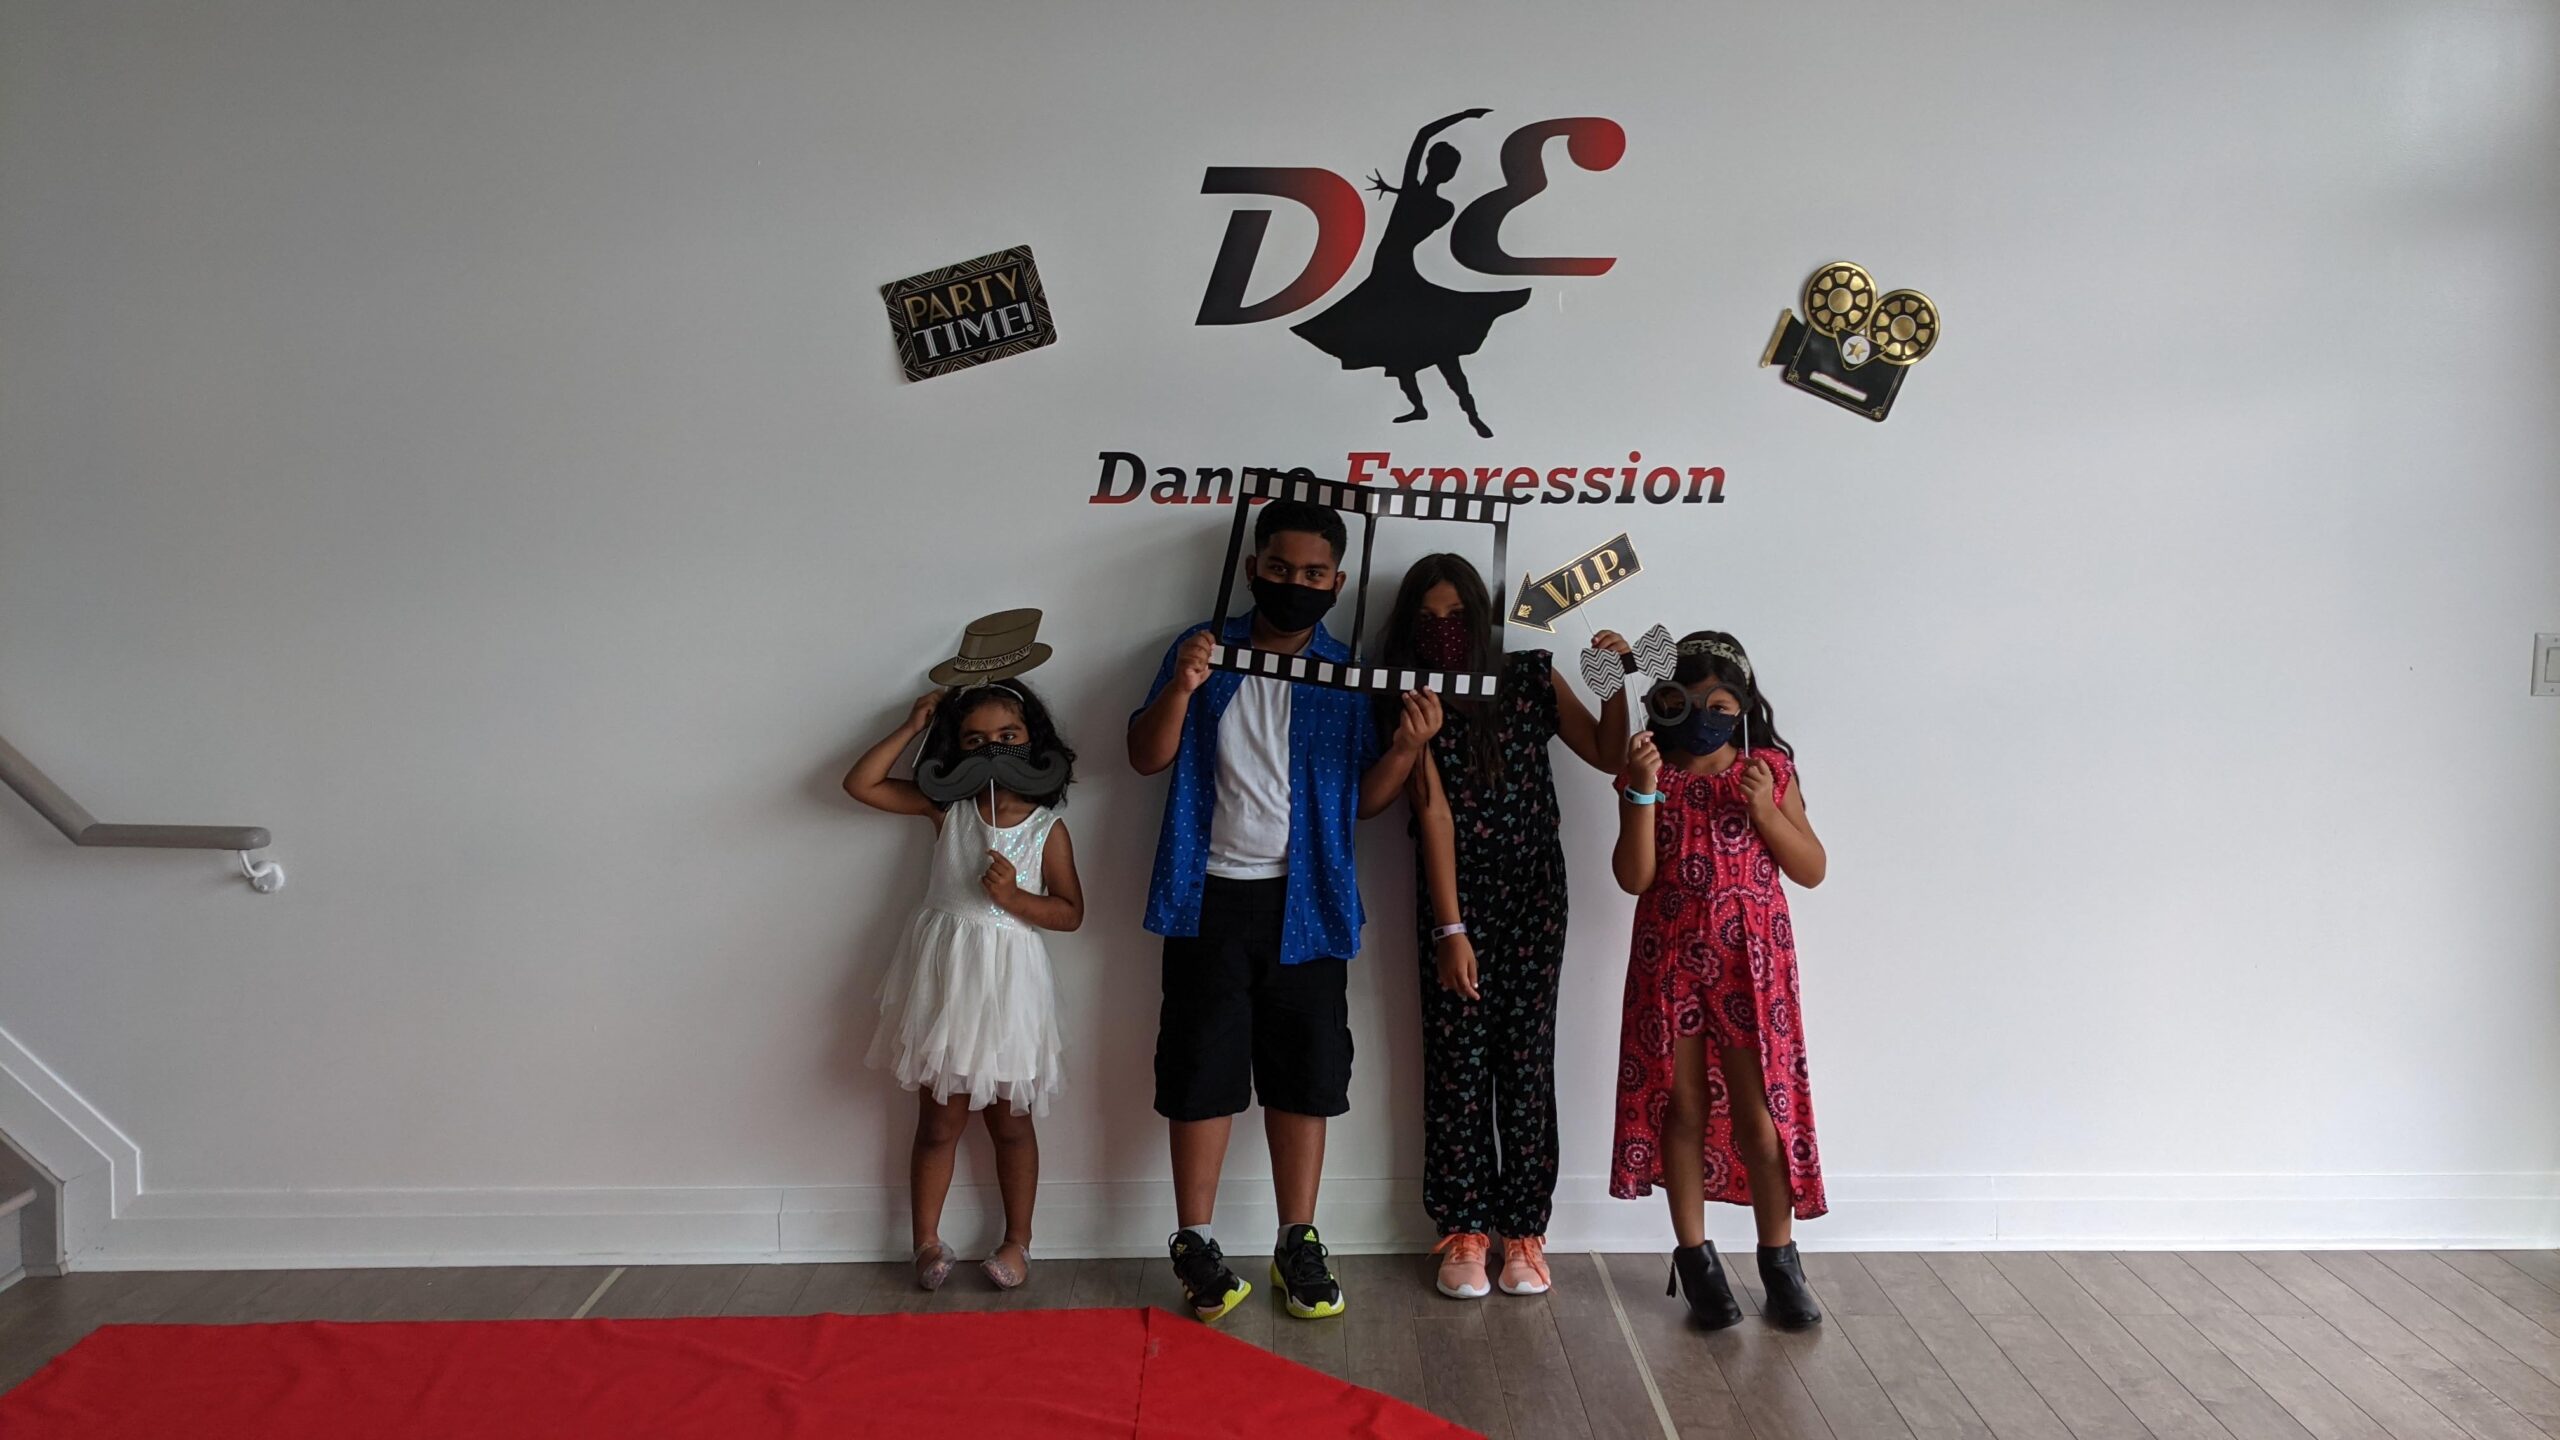 Four individuals are playfully posing with photo props in front of a Dance Expression studio wall, decked out in festive decorations, showcasing the enjoyable times they experienced at the Dance Expression Summer Camp program.